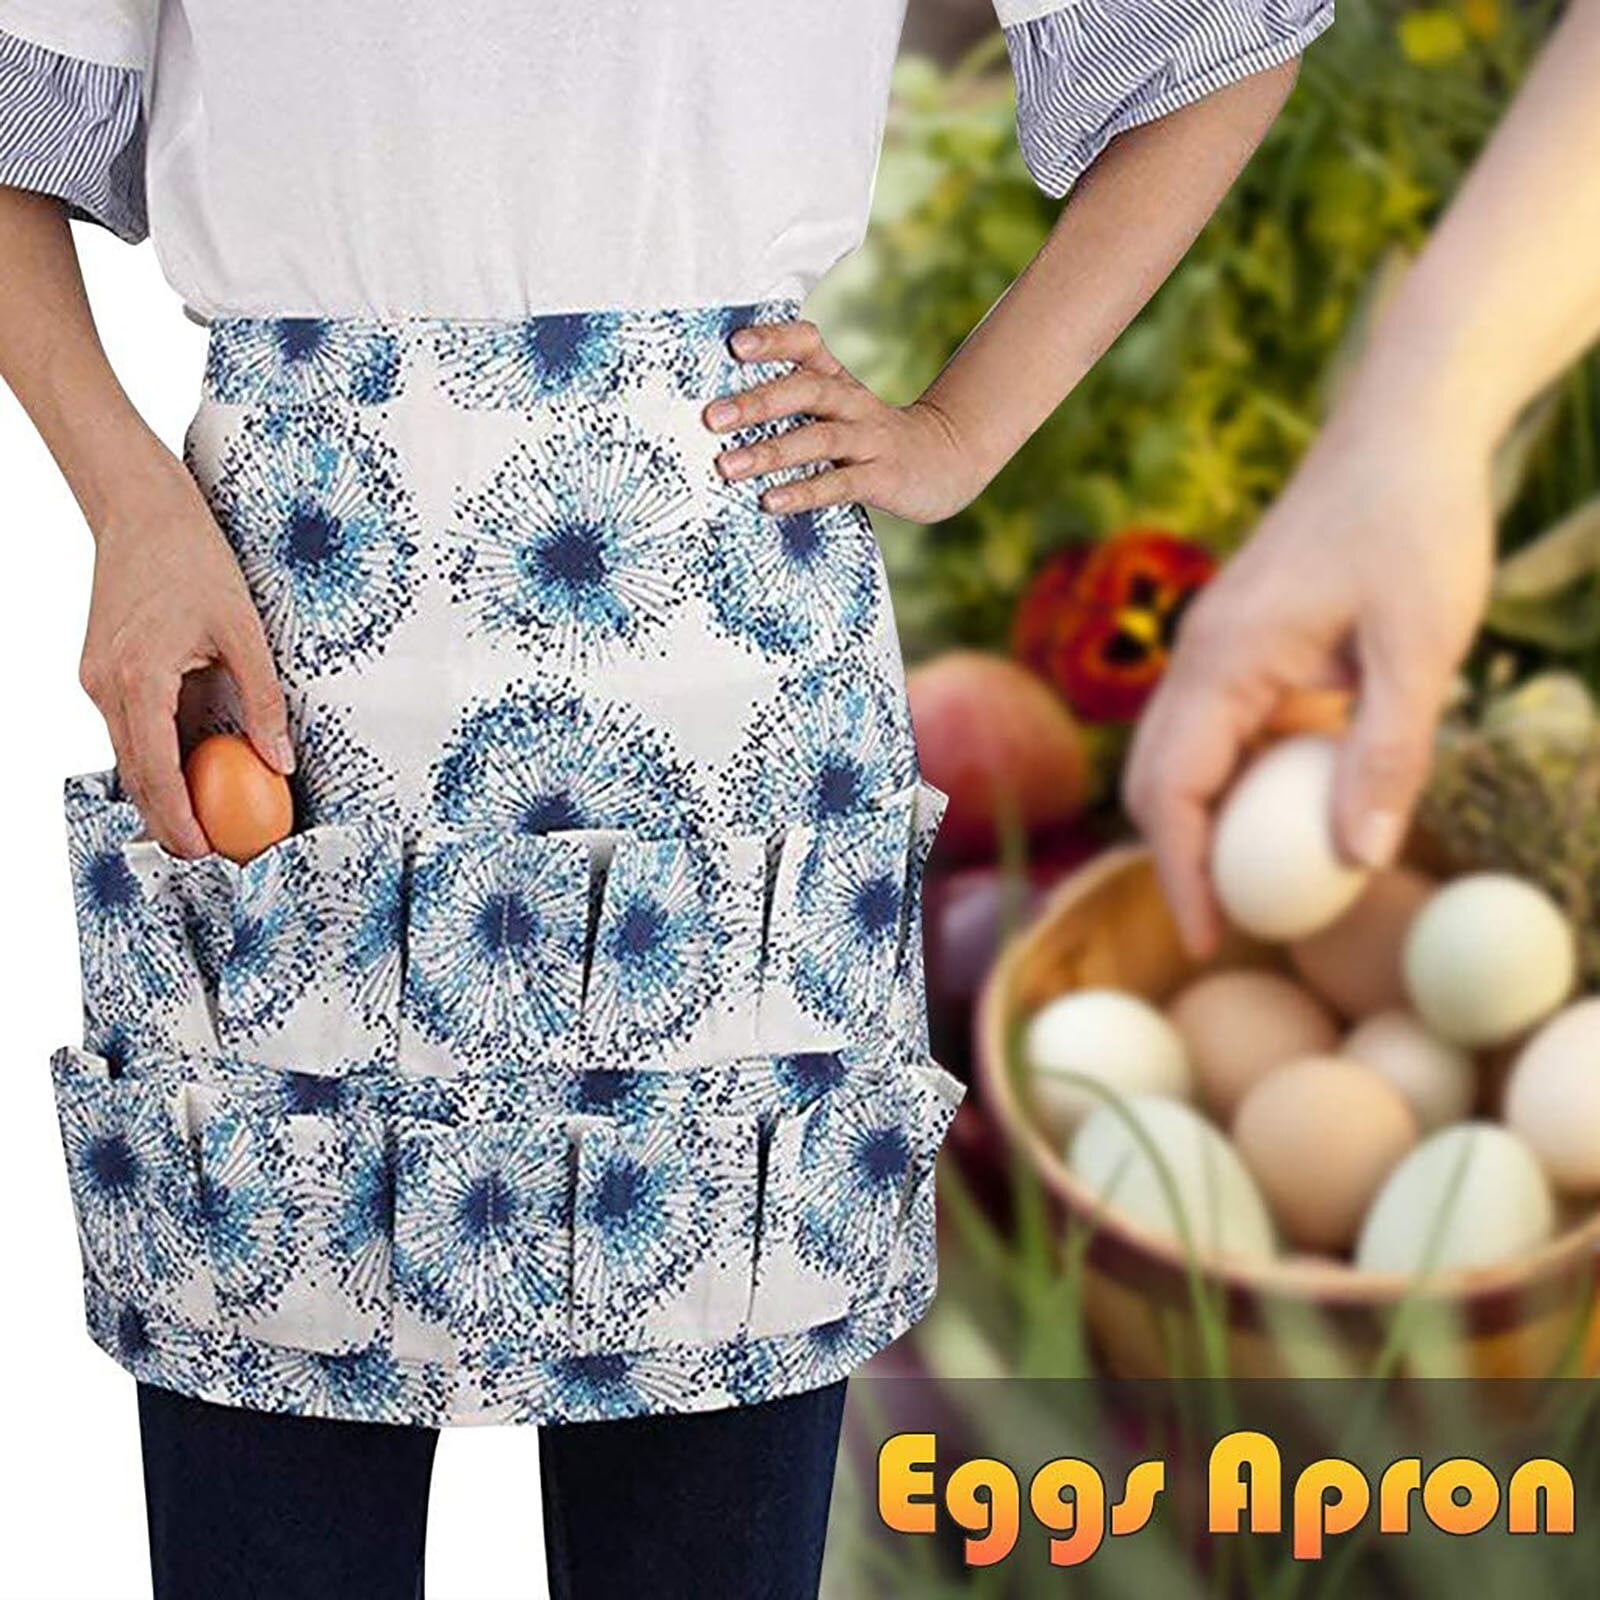 Aprons For Adults Chicken Egg Pocket Apron Egg Gathering Collecting Aprons  Deep Pockets Egg Holding Aprons for Chicken Eggs - AliExpress